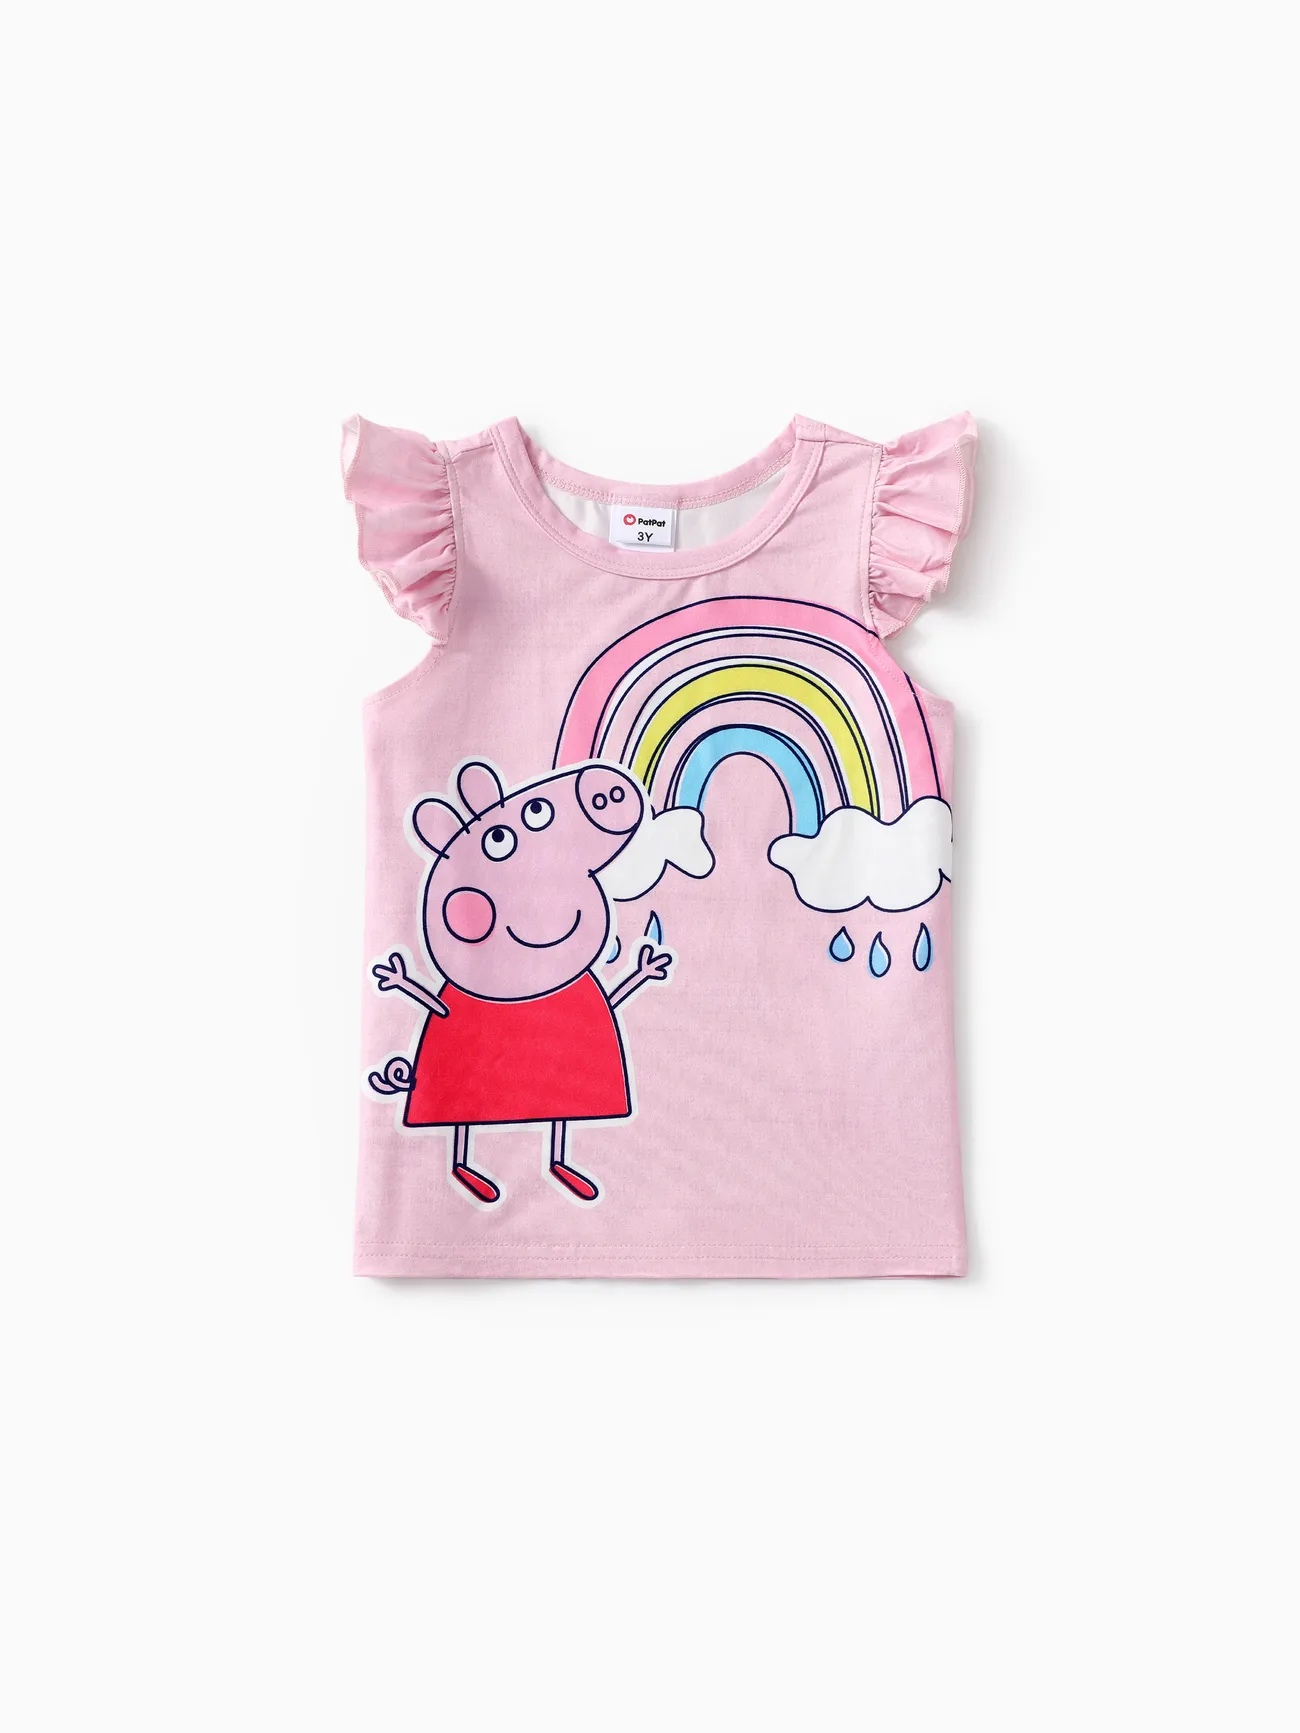 Peppa Pig Toddler Girls 1pc Rainbow Floral Character Print Flutter-sleeve Top Pink big image 1